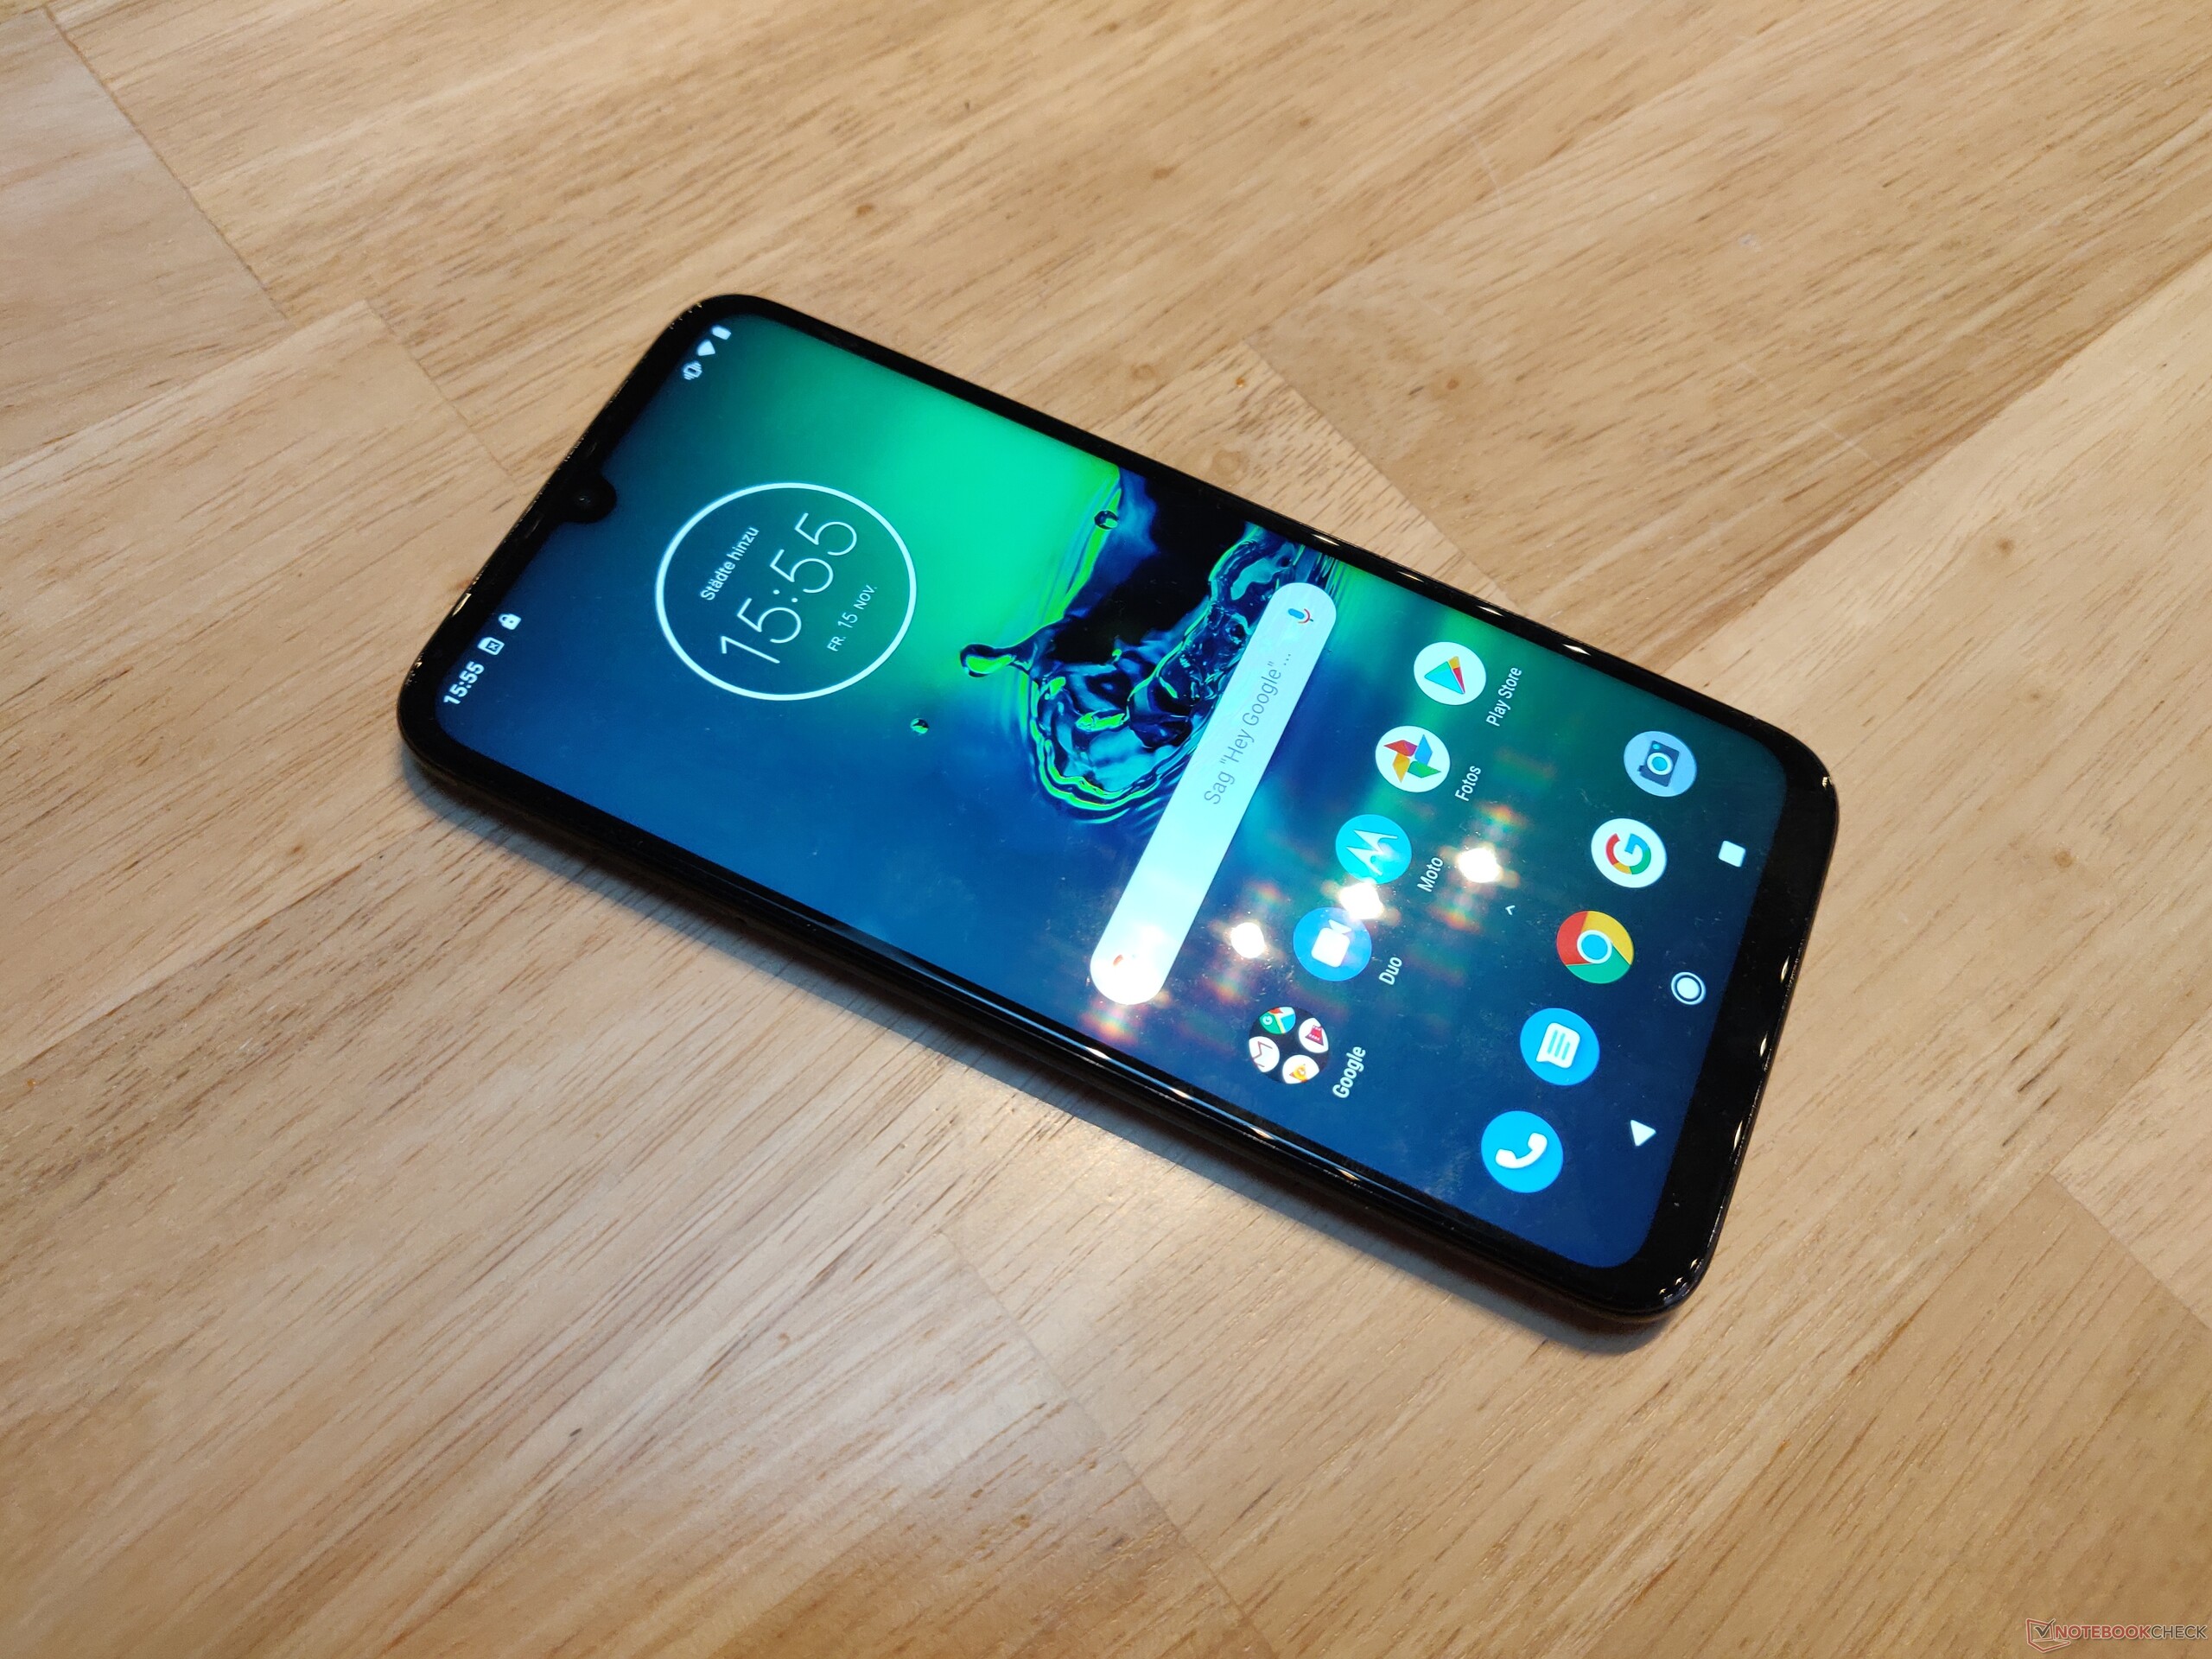 Motorola Moto G8 Plus smartphone review – Mobile phone with action